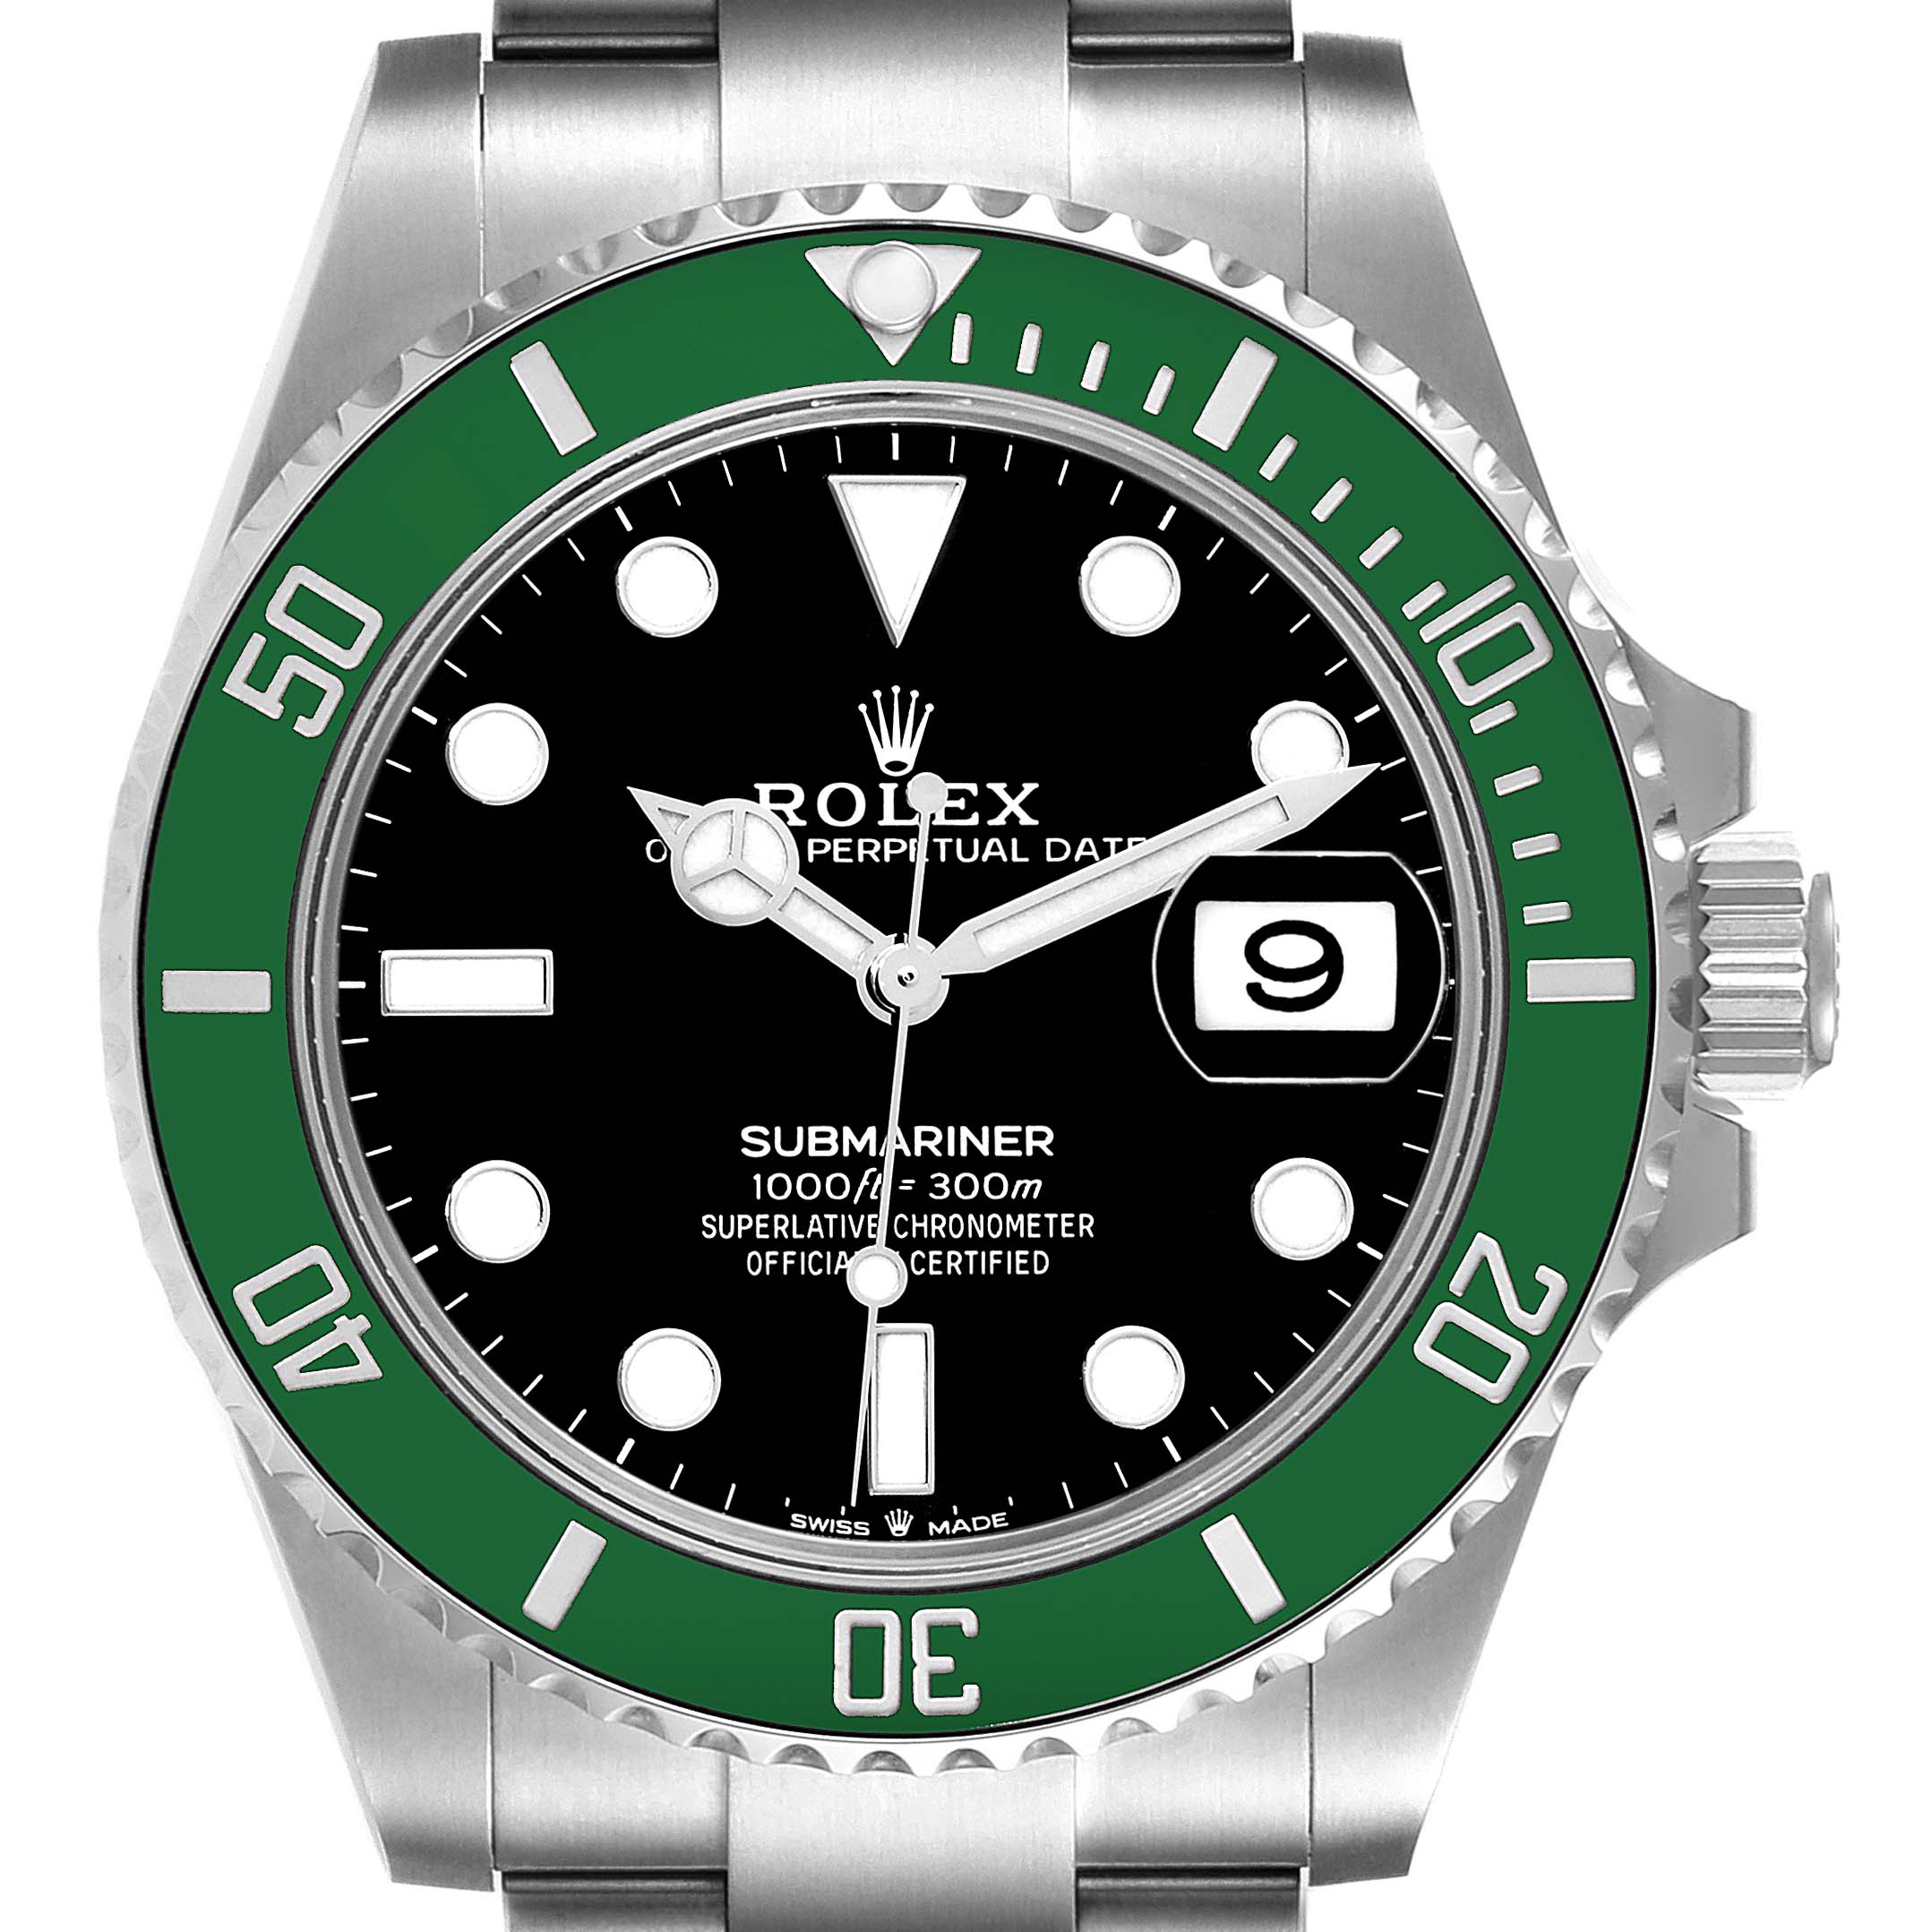 Rolex Submariner Date 126610LV - Jewels and Time London  Rolex submariner  no date, Rolex watch price, Rolex submariner